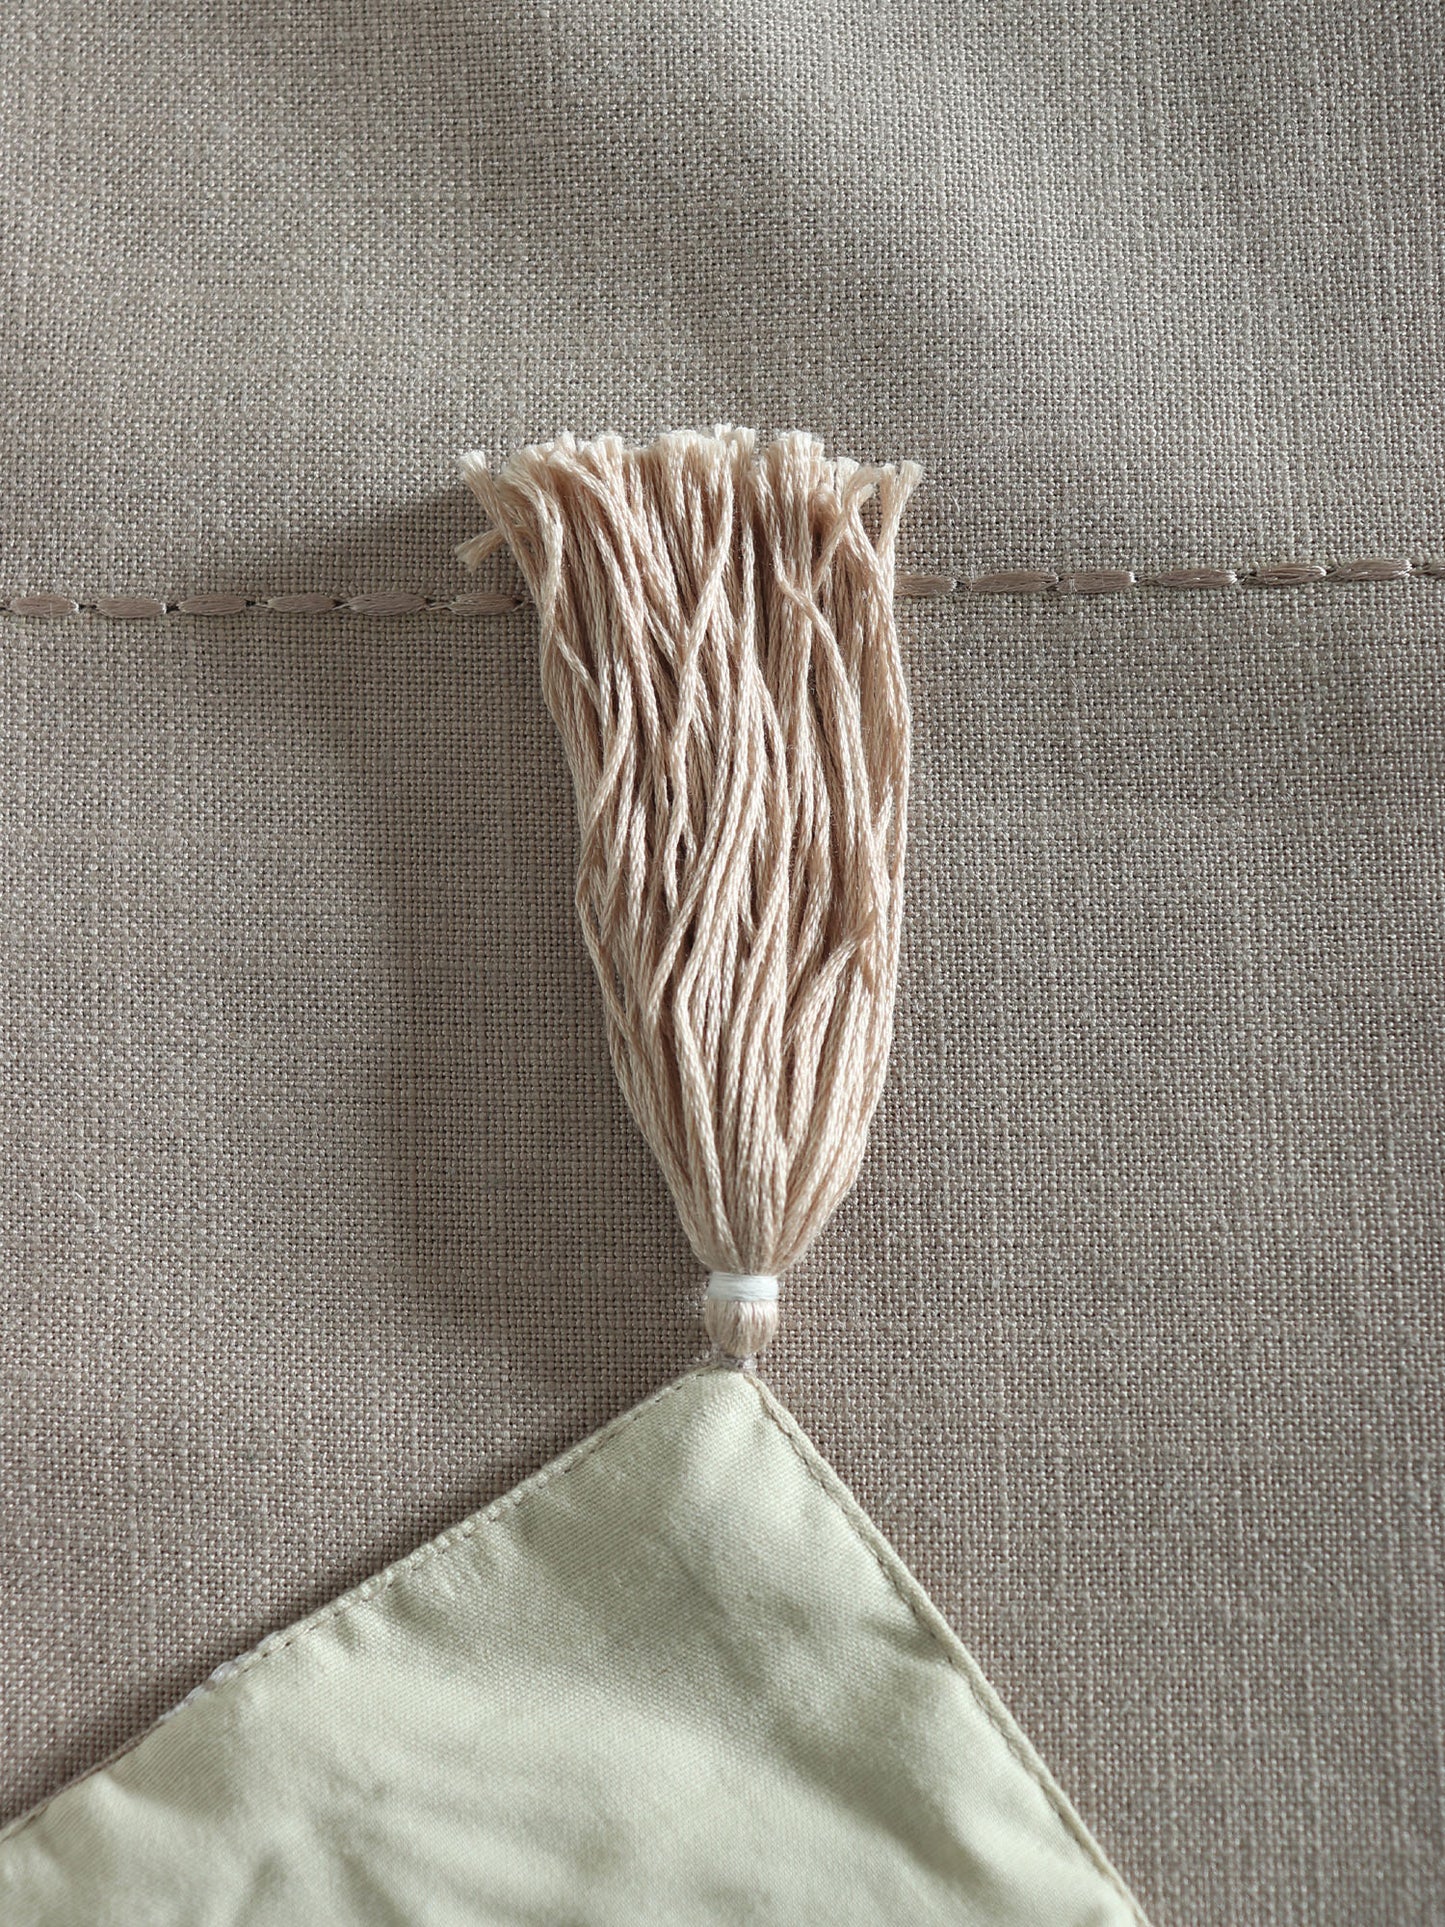 tassels on beige table runner which has floral embroidery - 12x84 inch